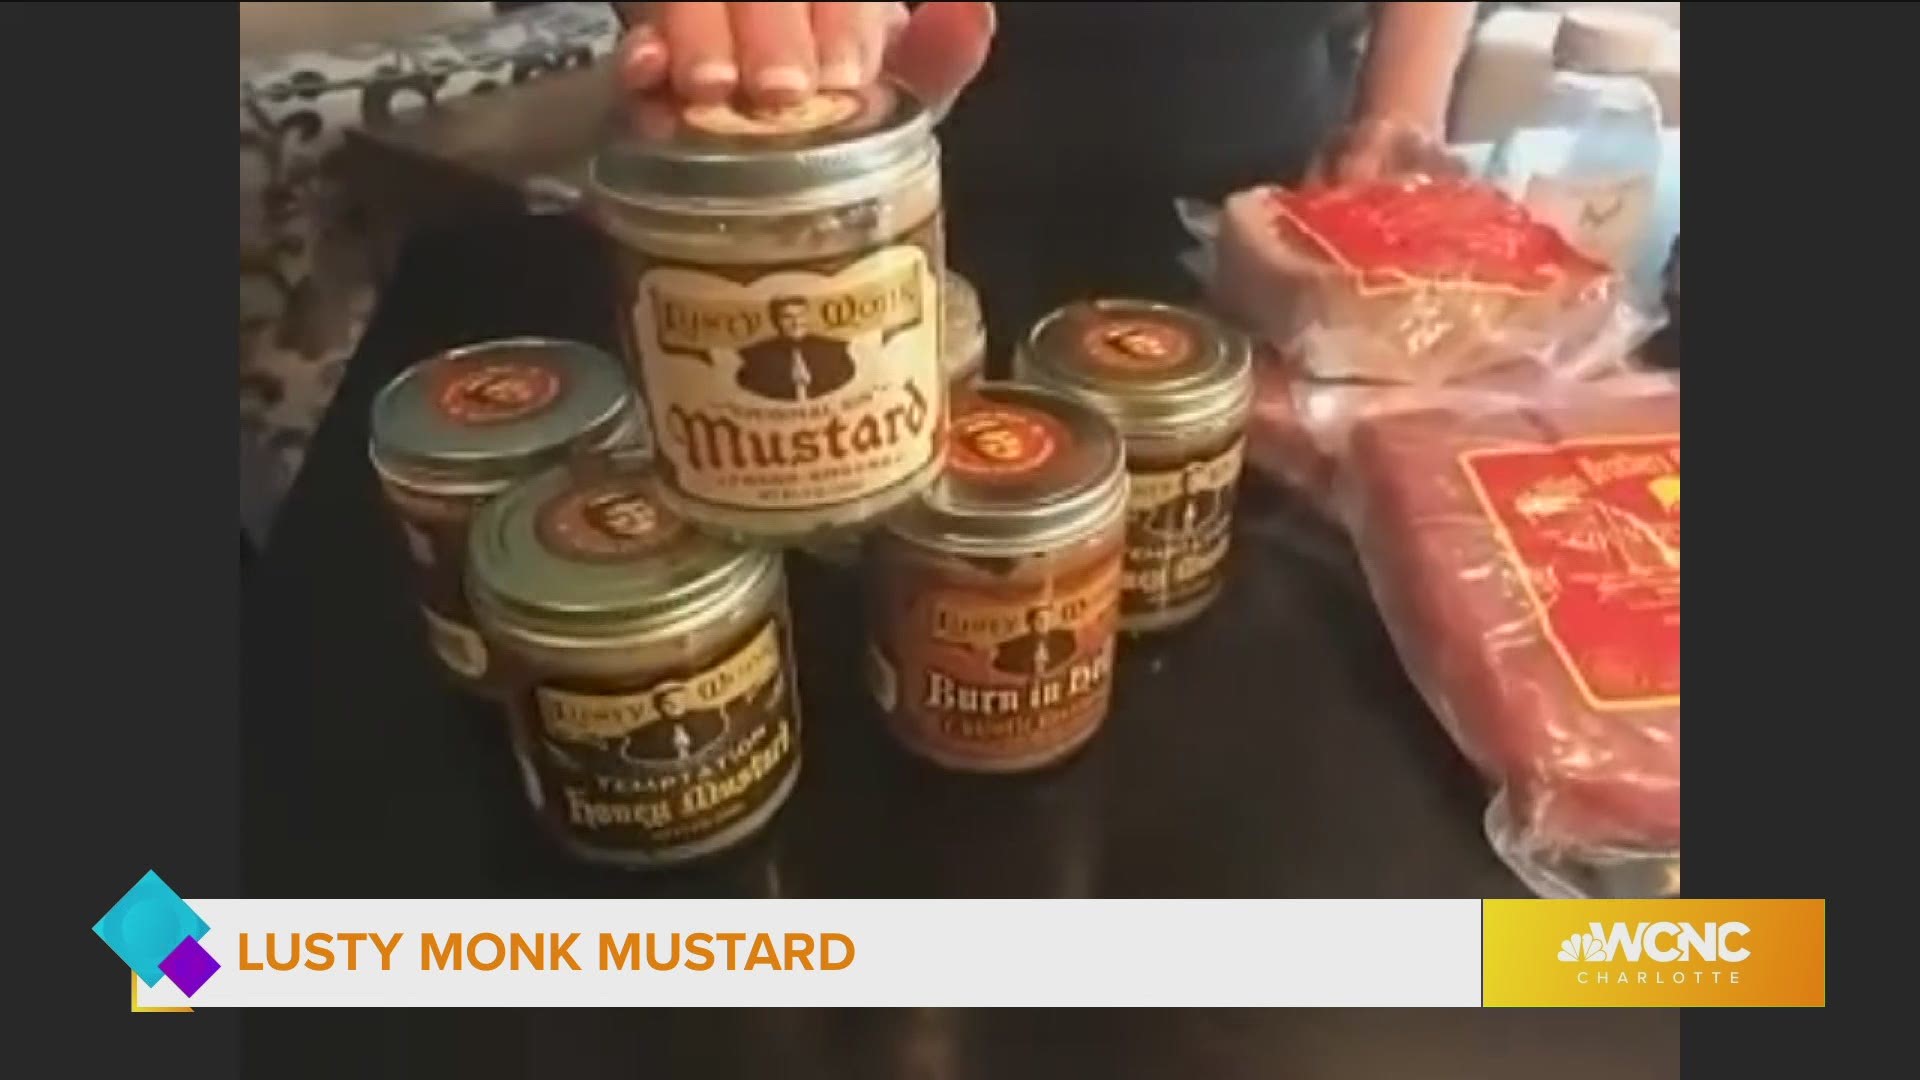 Culinary expert Heidi Billotto shares some favorite local products